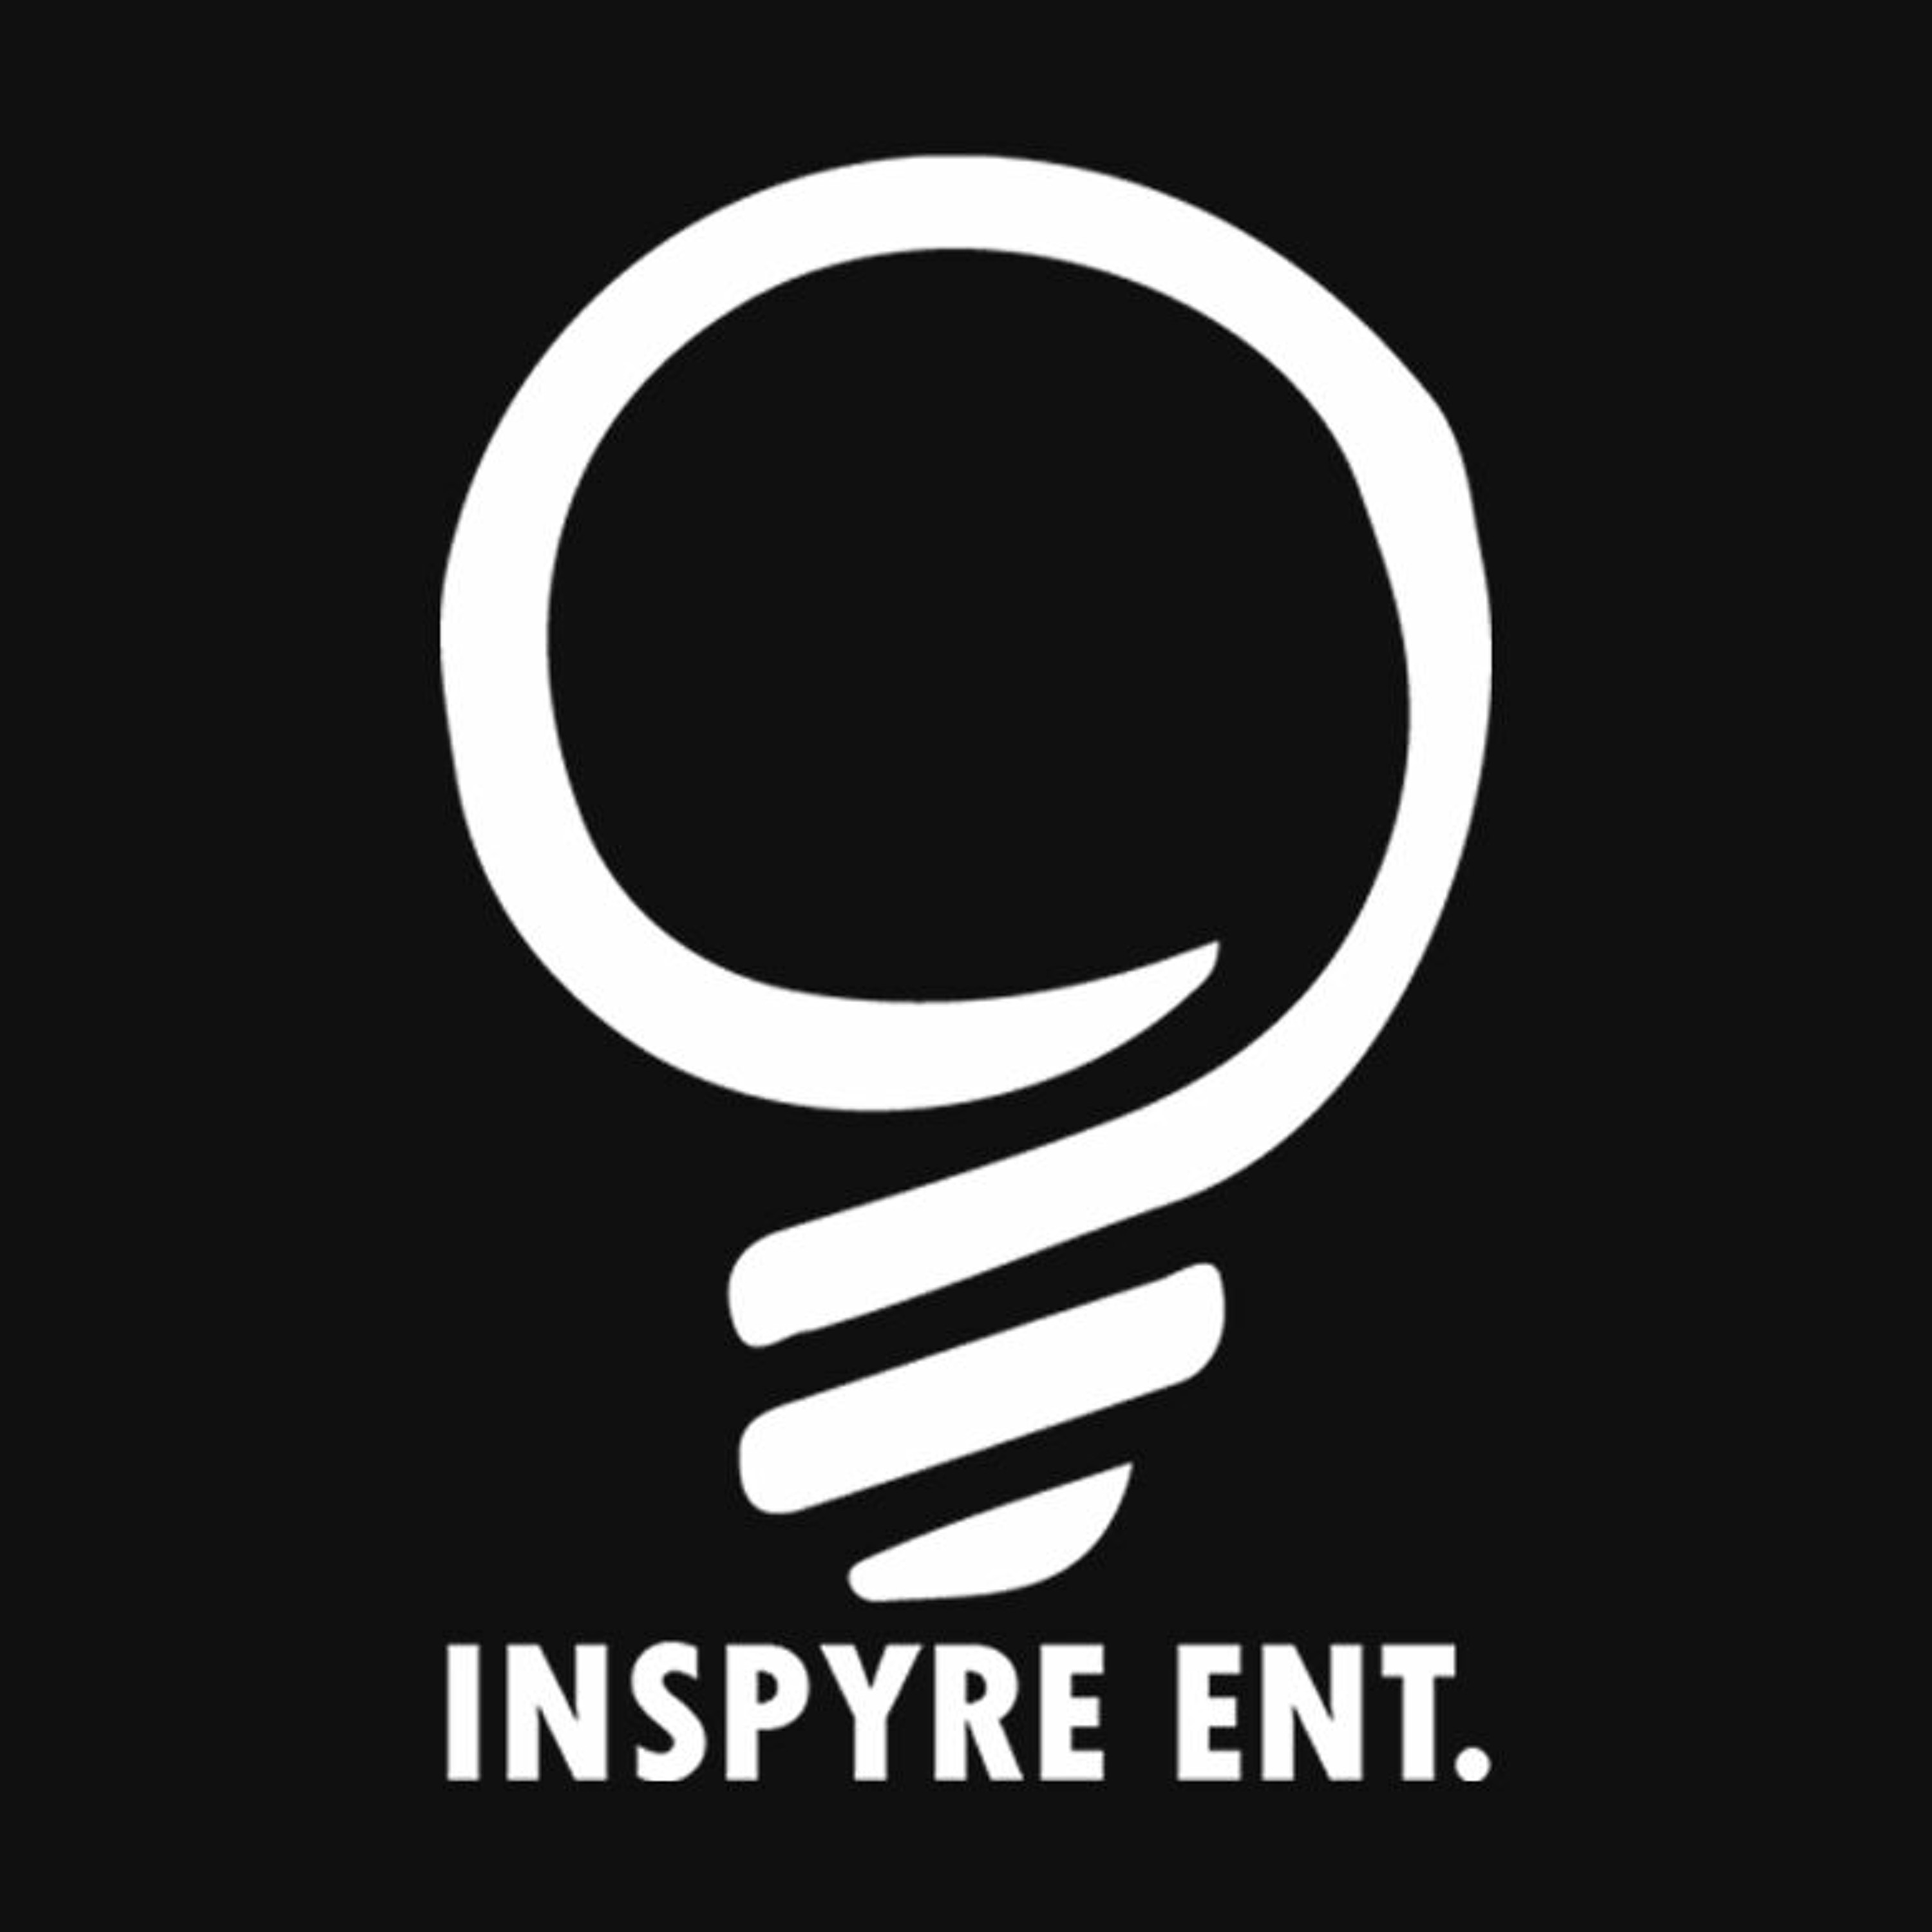 Inspyre Reads - S3:E4 - The importance of storytelling